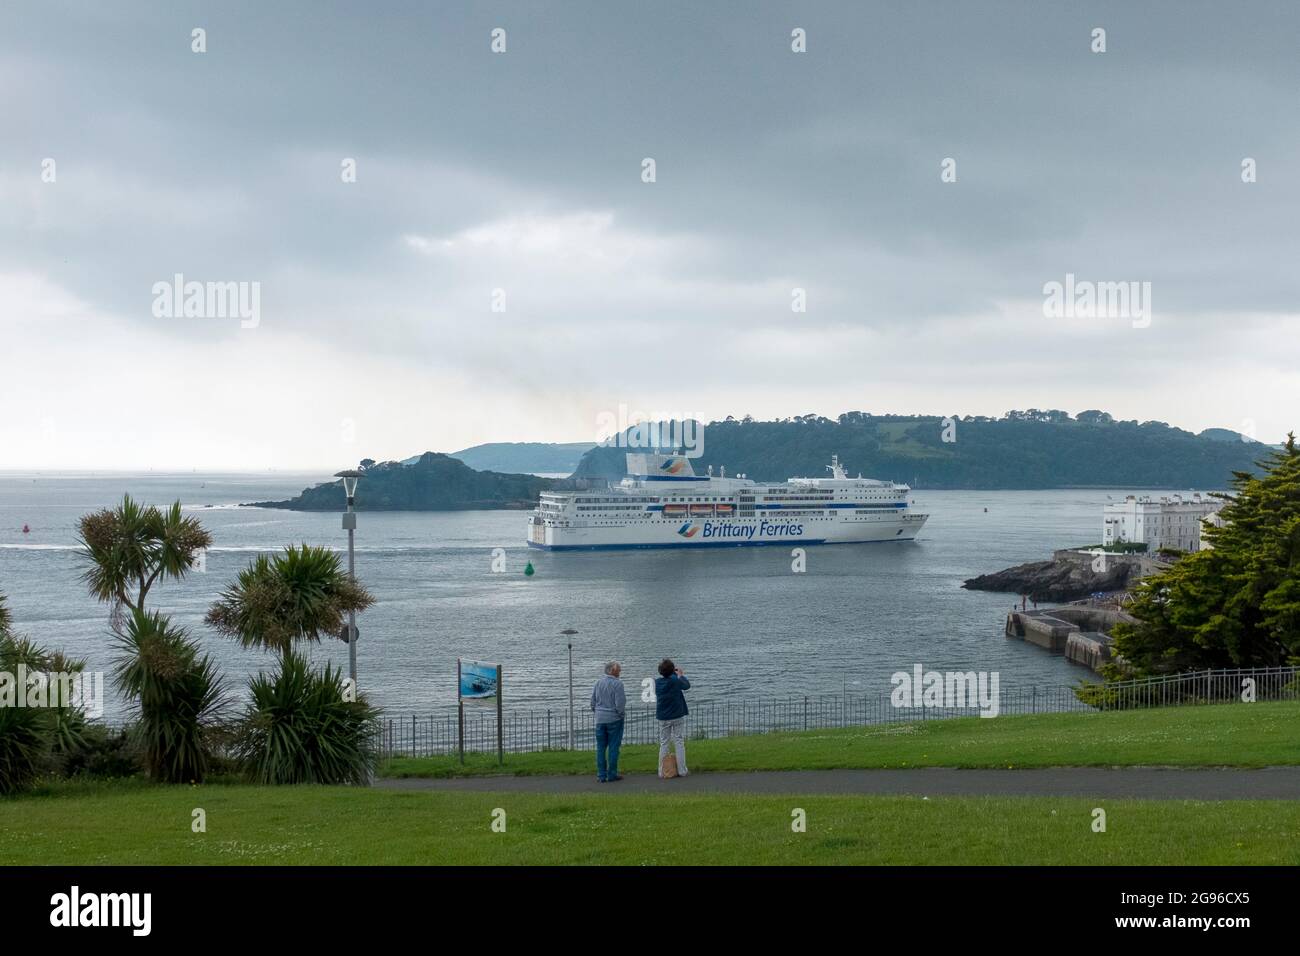 A Brittany Ferries ship heads towards the Brittany berth in Plymouth watched from Hoe Park by two people Stock Photo